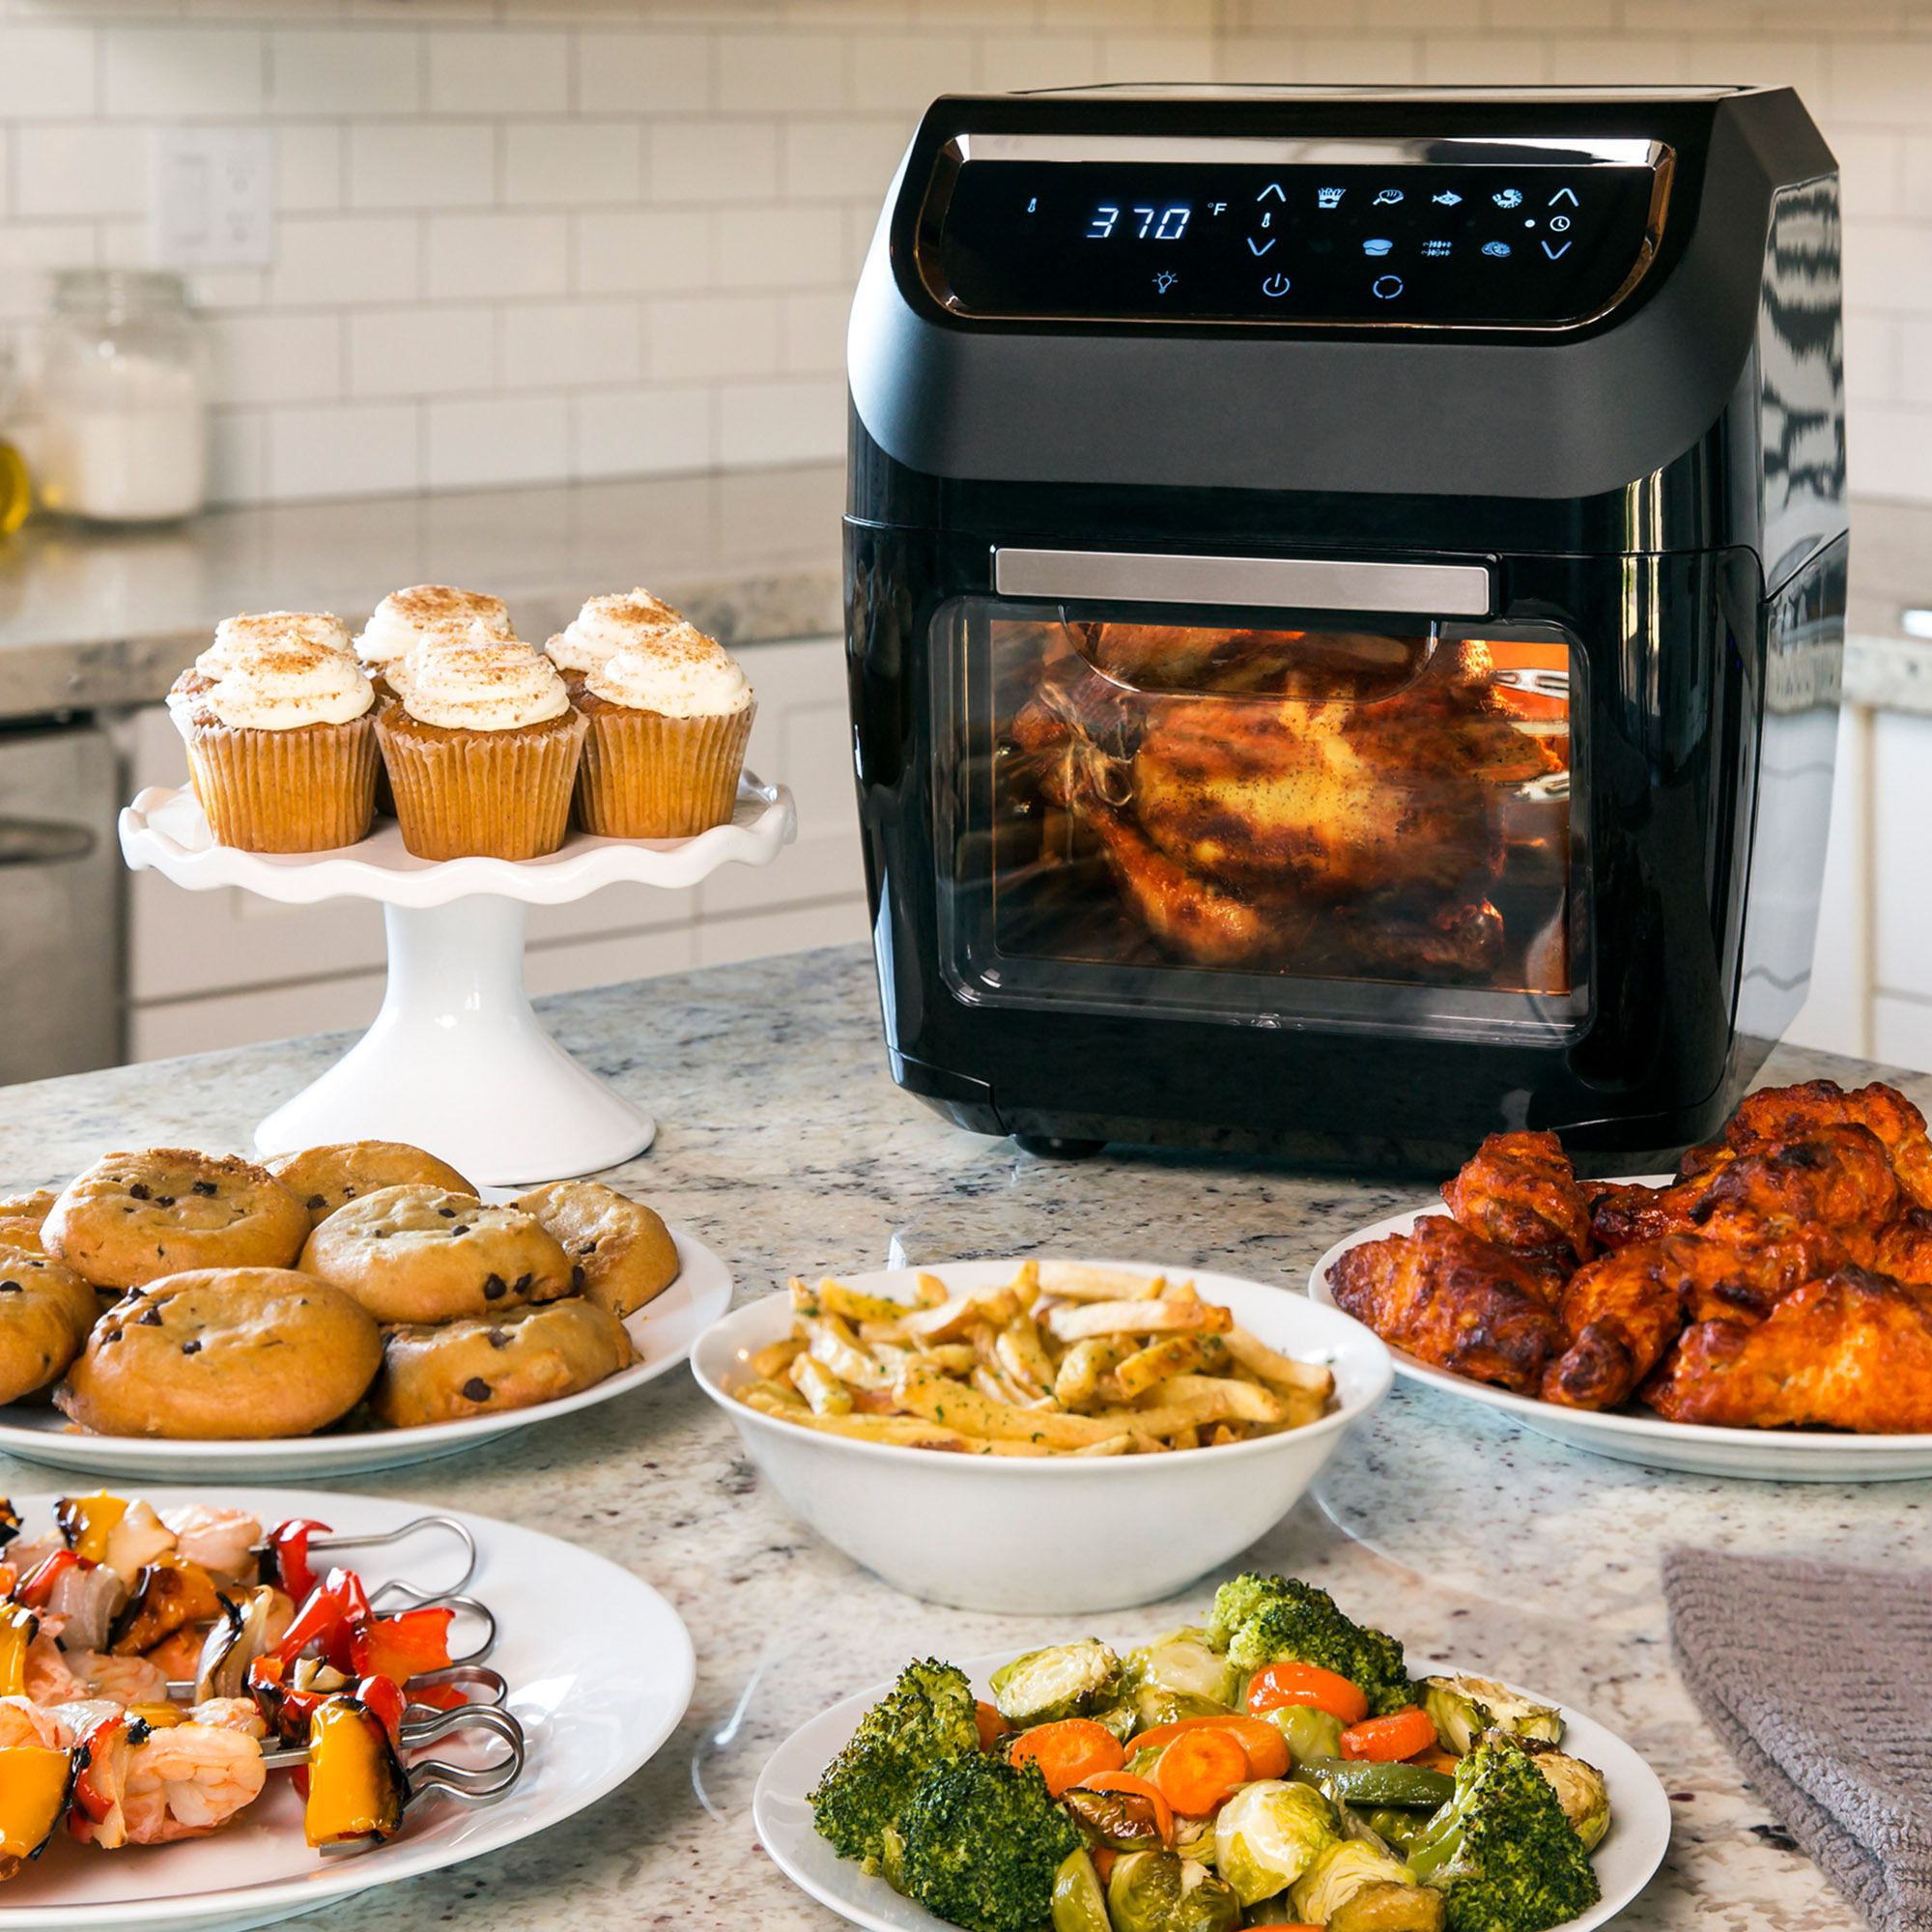 https://www.digitaltrends.com/wp-content/uploads/2019/10/best-choice-products-11-6-quart-1700w-8-in-1-electric-xl-air-fryer-oven-3.jpg?p=1